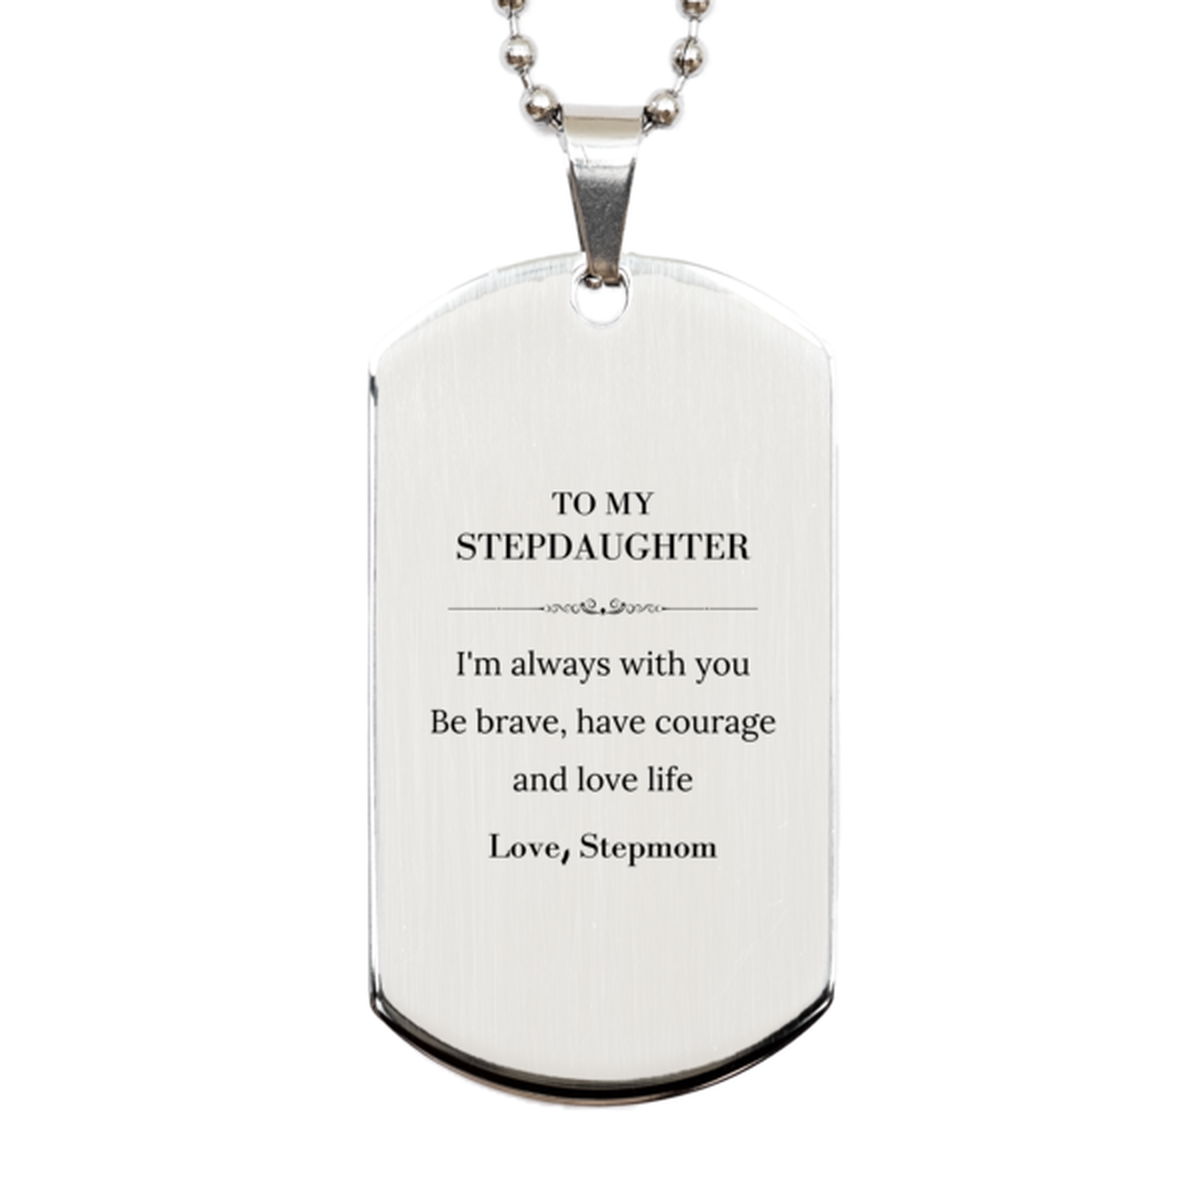 To My Stepdaughter Gifts from Stepmom, Unique Silver Dog Tag Inspirational Christmas Birthday Graduation Gifts for Stepdaughter I'm always with you. Be brave, have courage and love life. Love, Stepmom